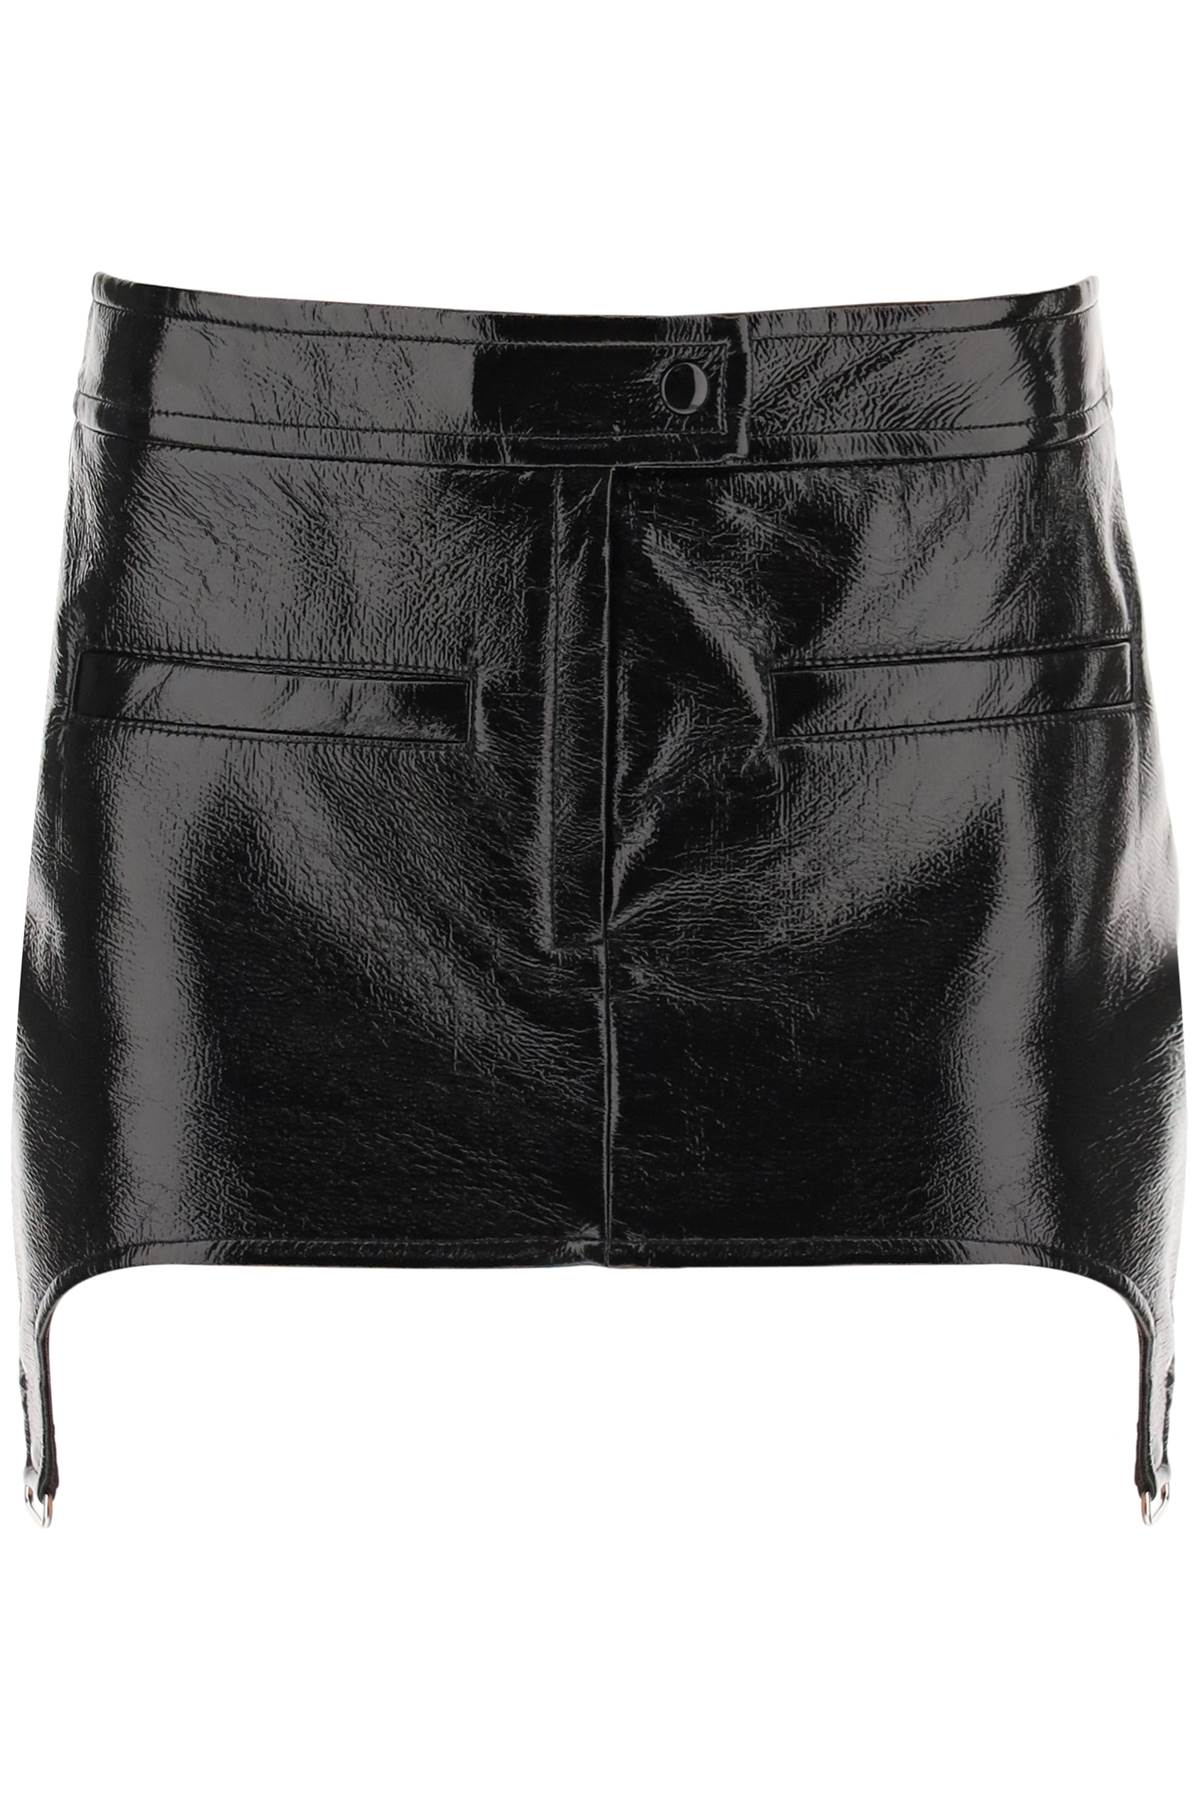 Courrèges vinyl effect mini skirt with suspenders 123CJU078VY00149999